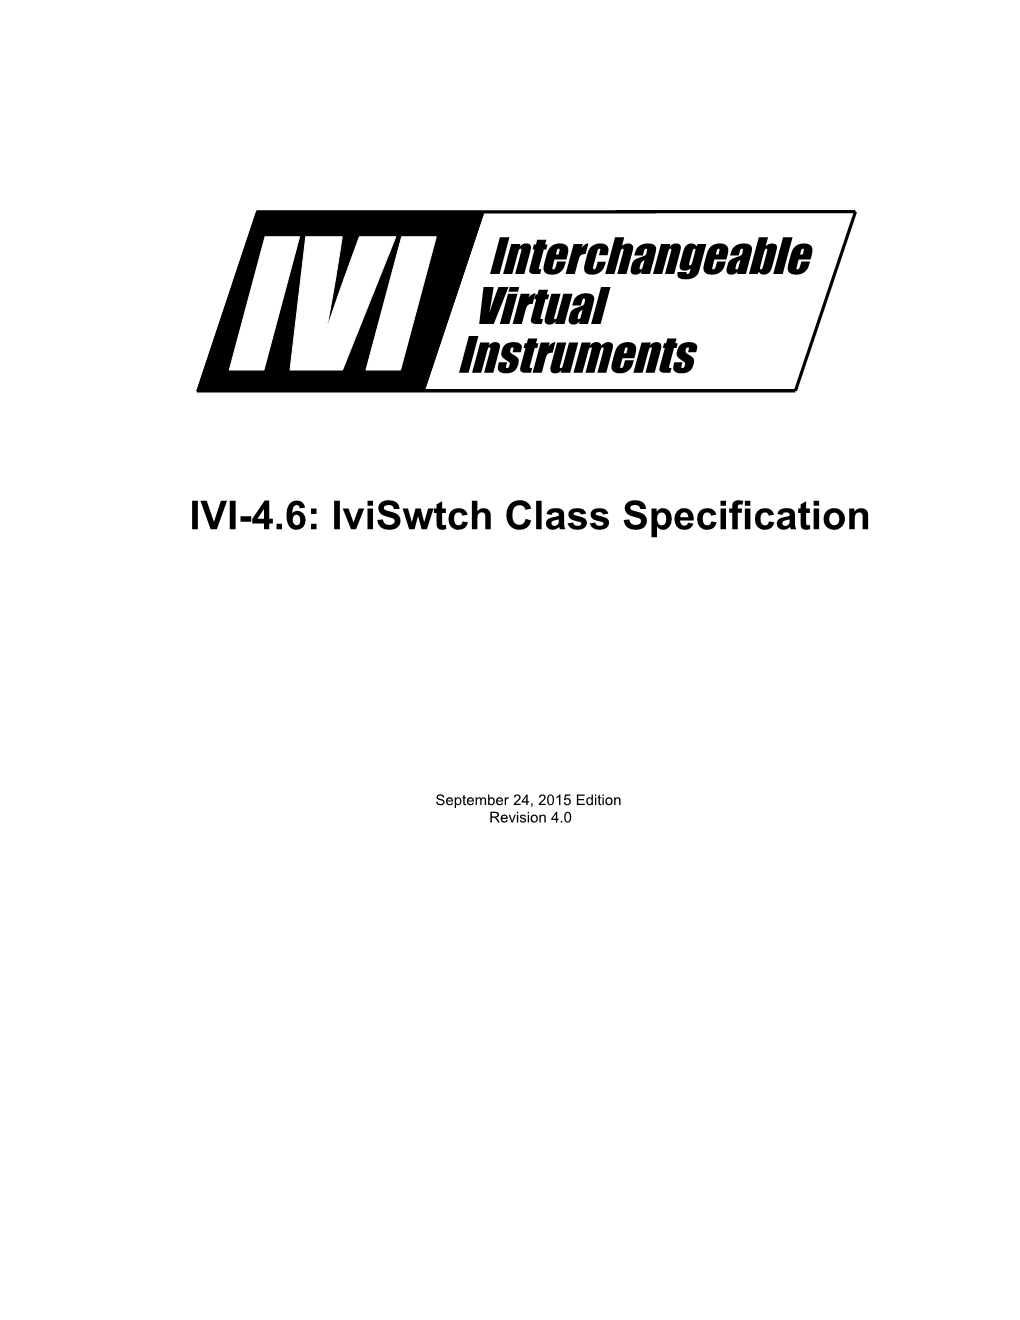 Iviswtch Class Specification